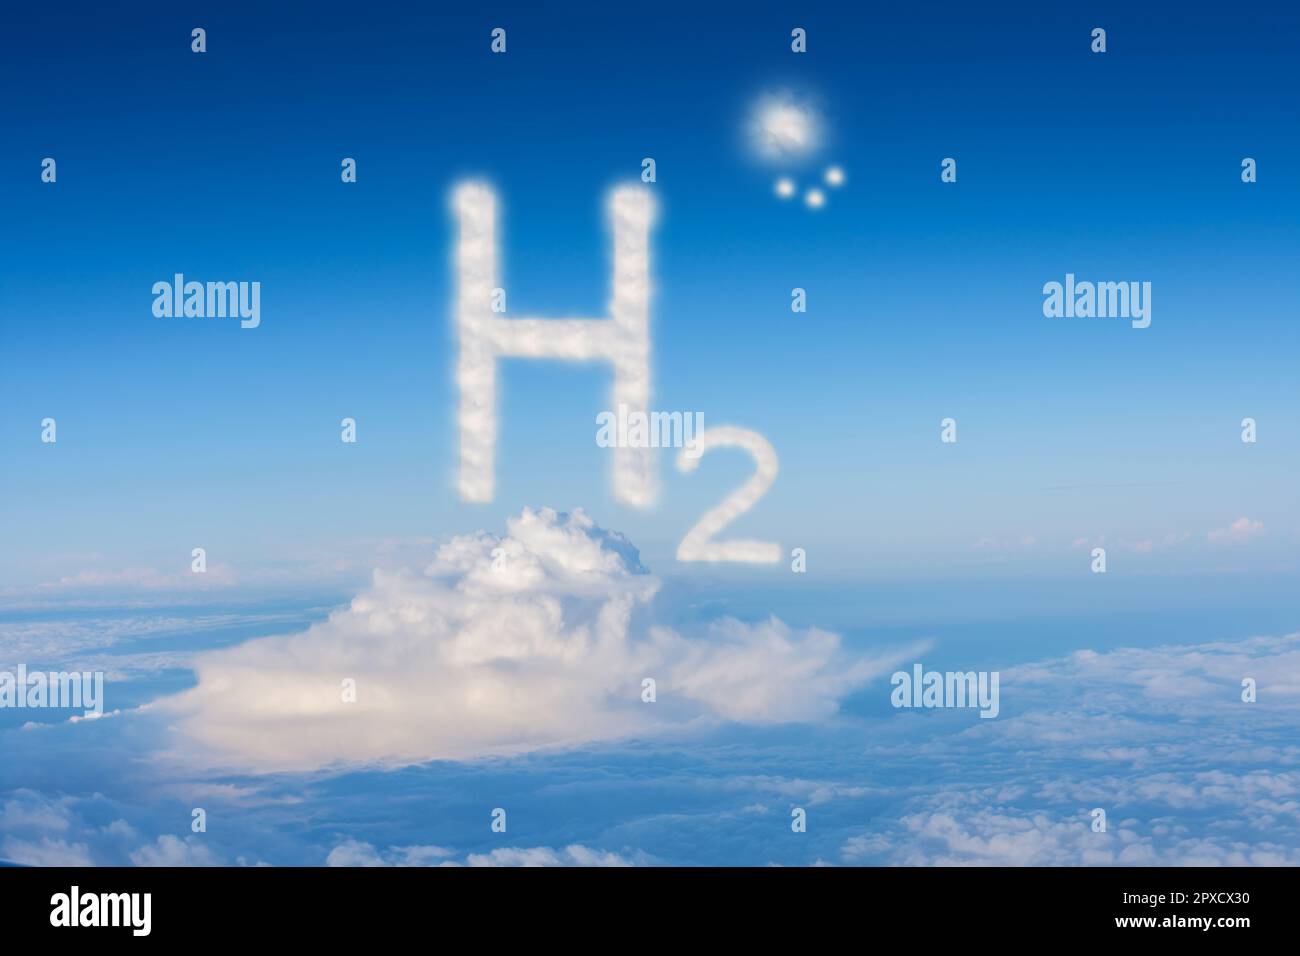 3D illustration renewable pure energy soft white h2 hydrogen over white clouds on deep blue Stock Photo